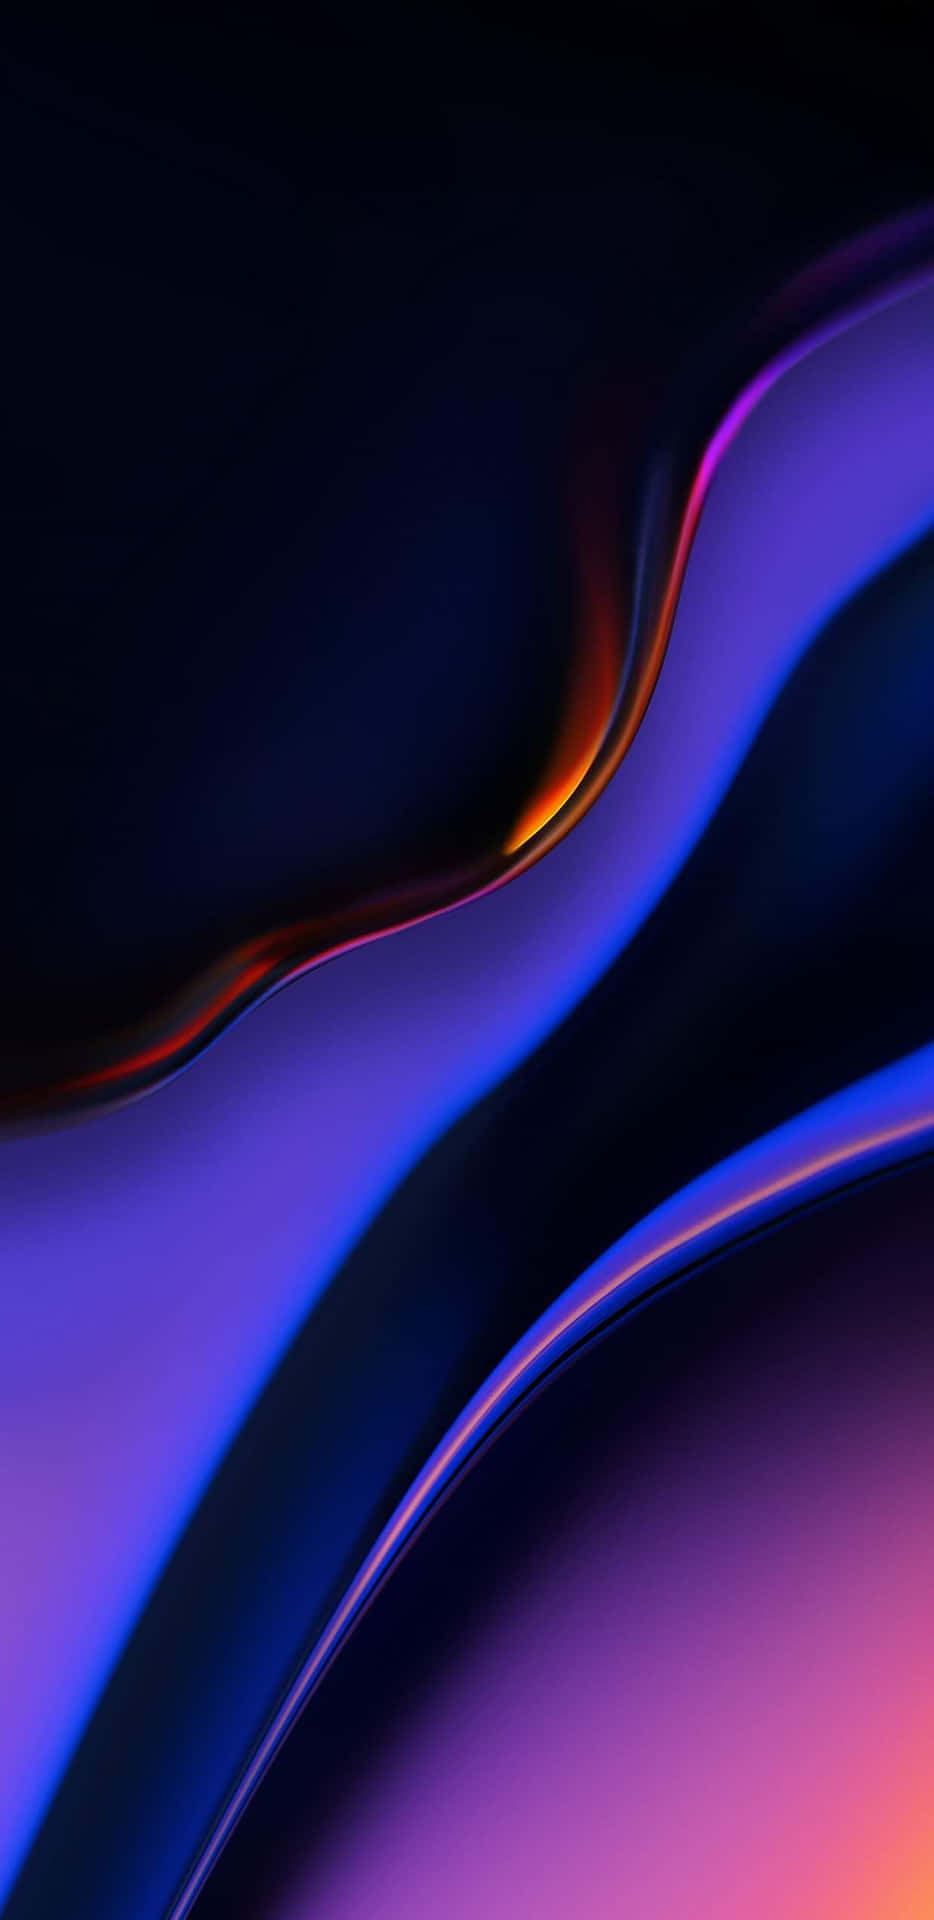 Galaxy Note with Artistic Background Wallpaper